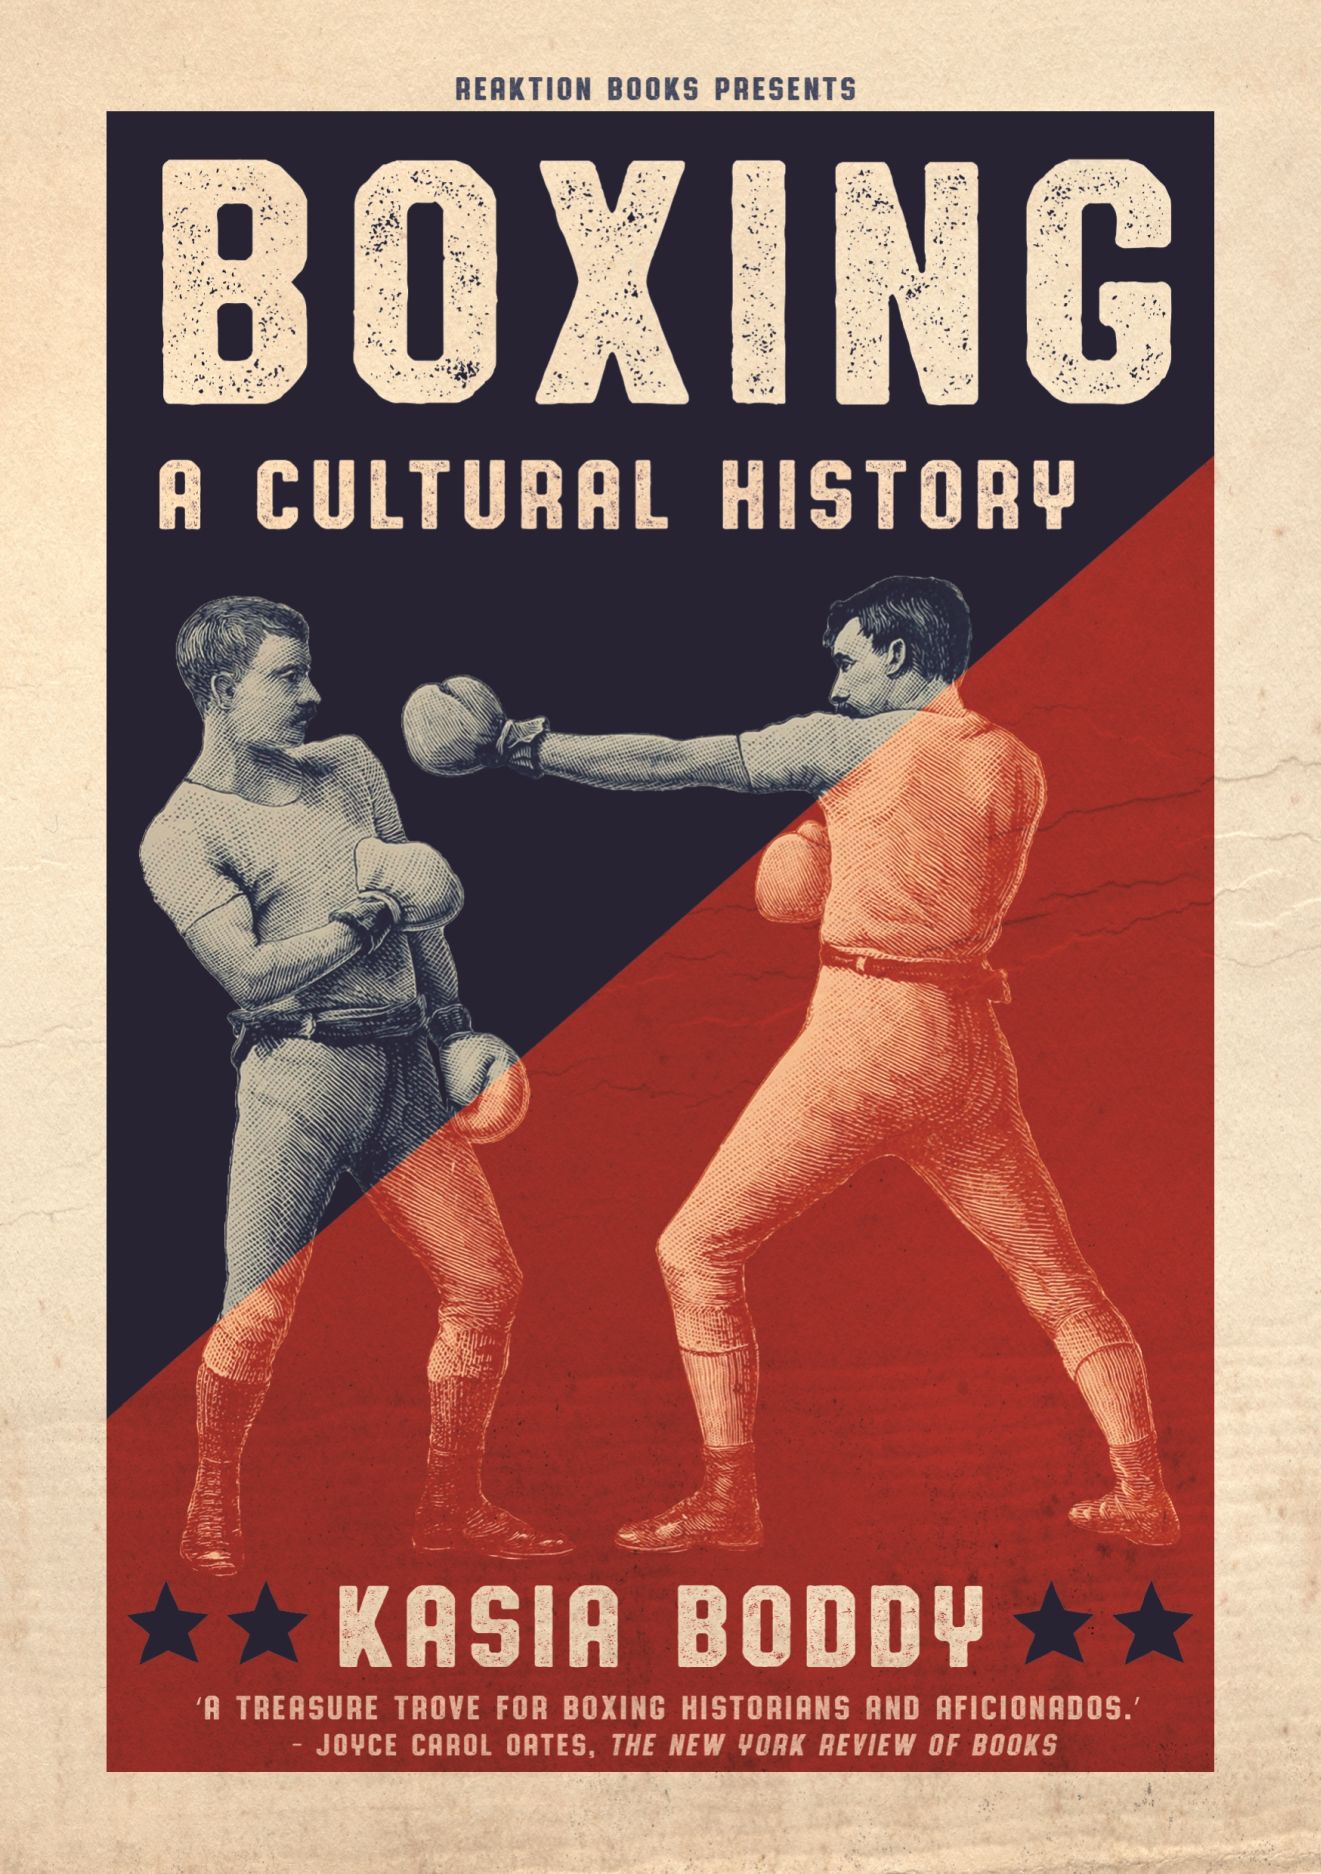 Boxing is serious It's not came just one Punch (Paperback) 